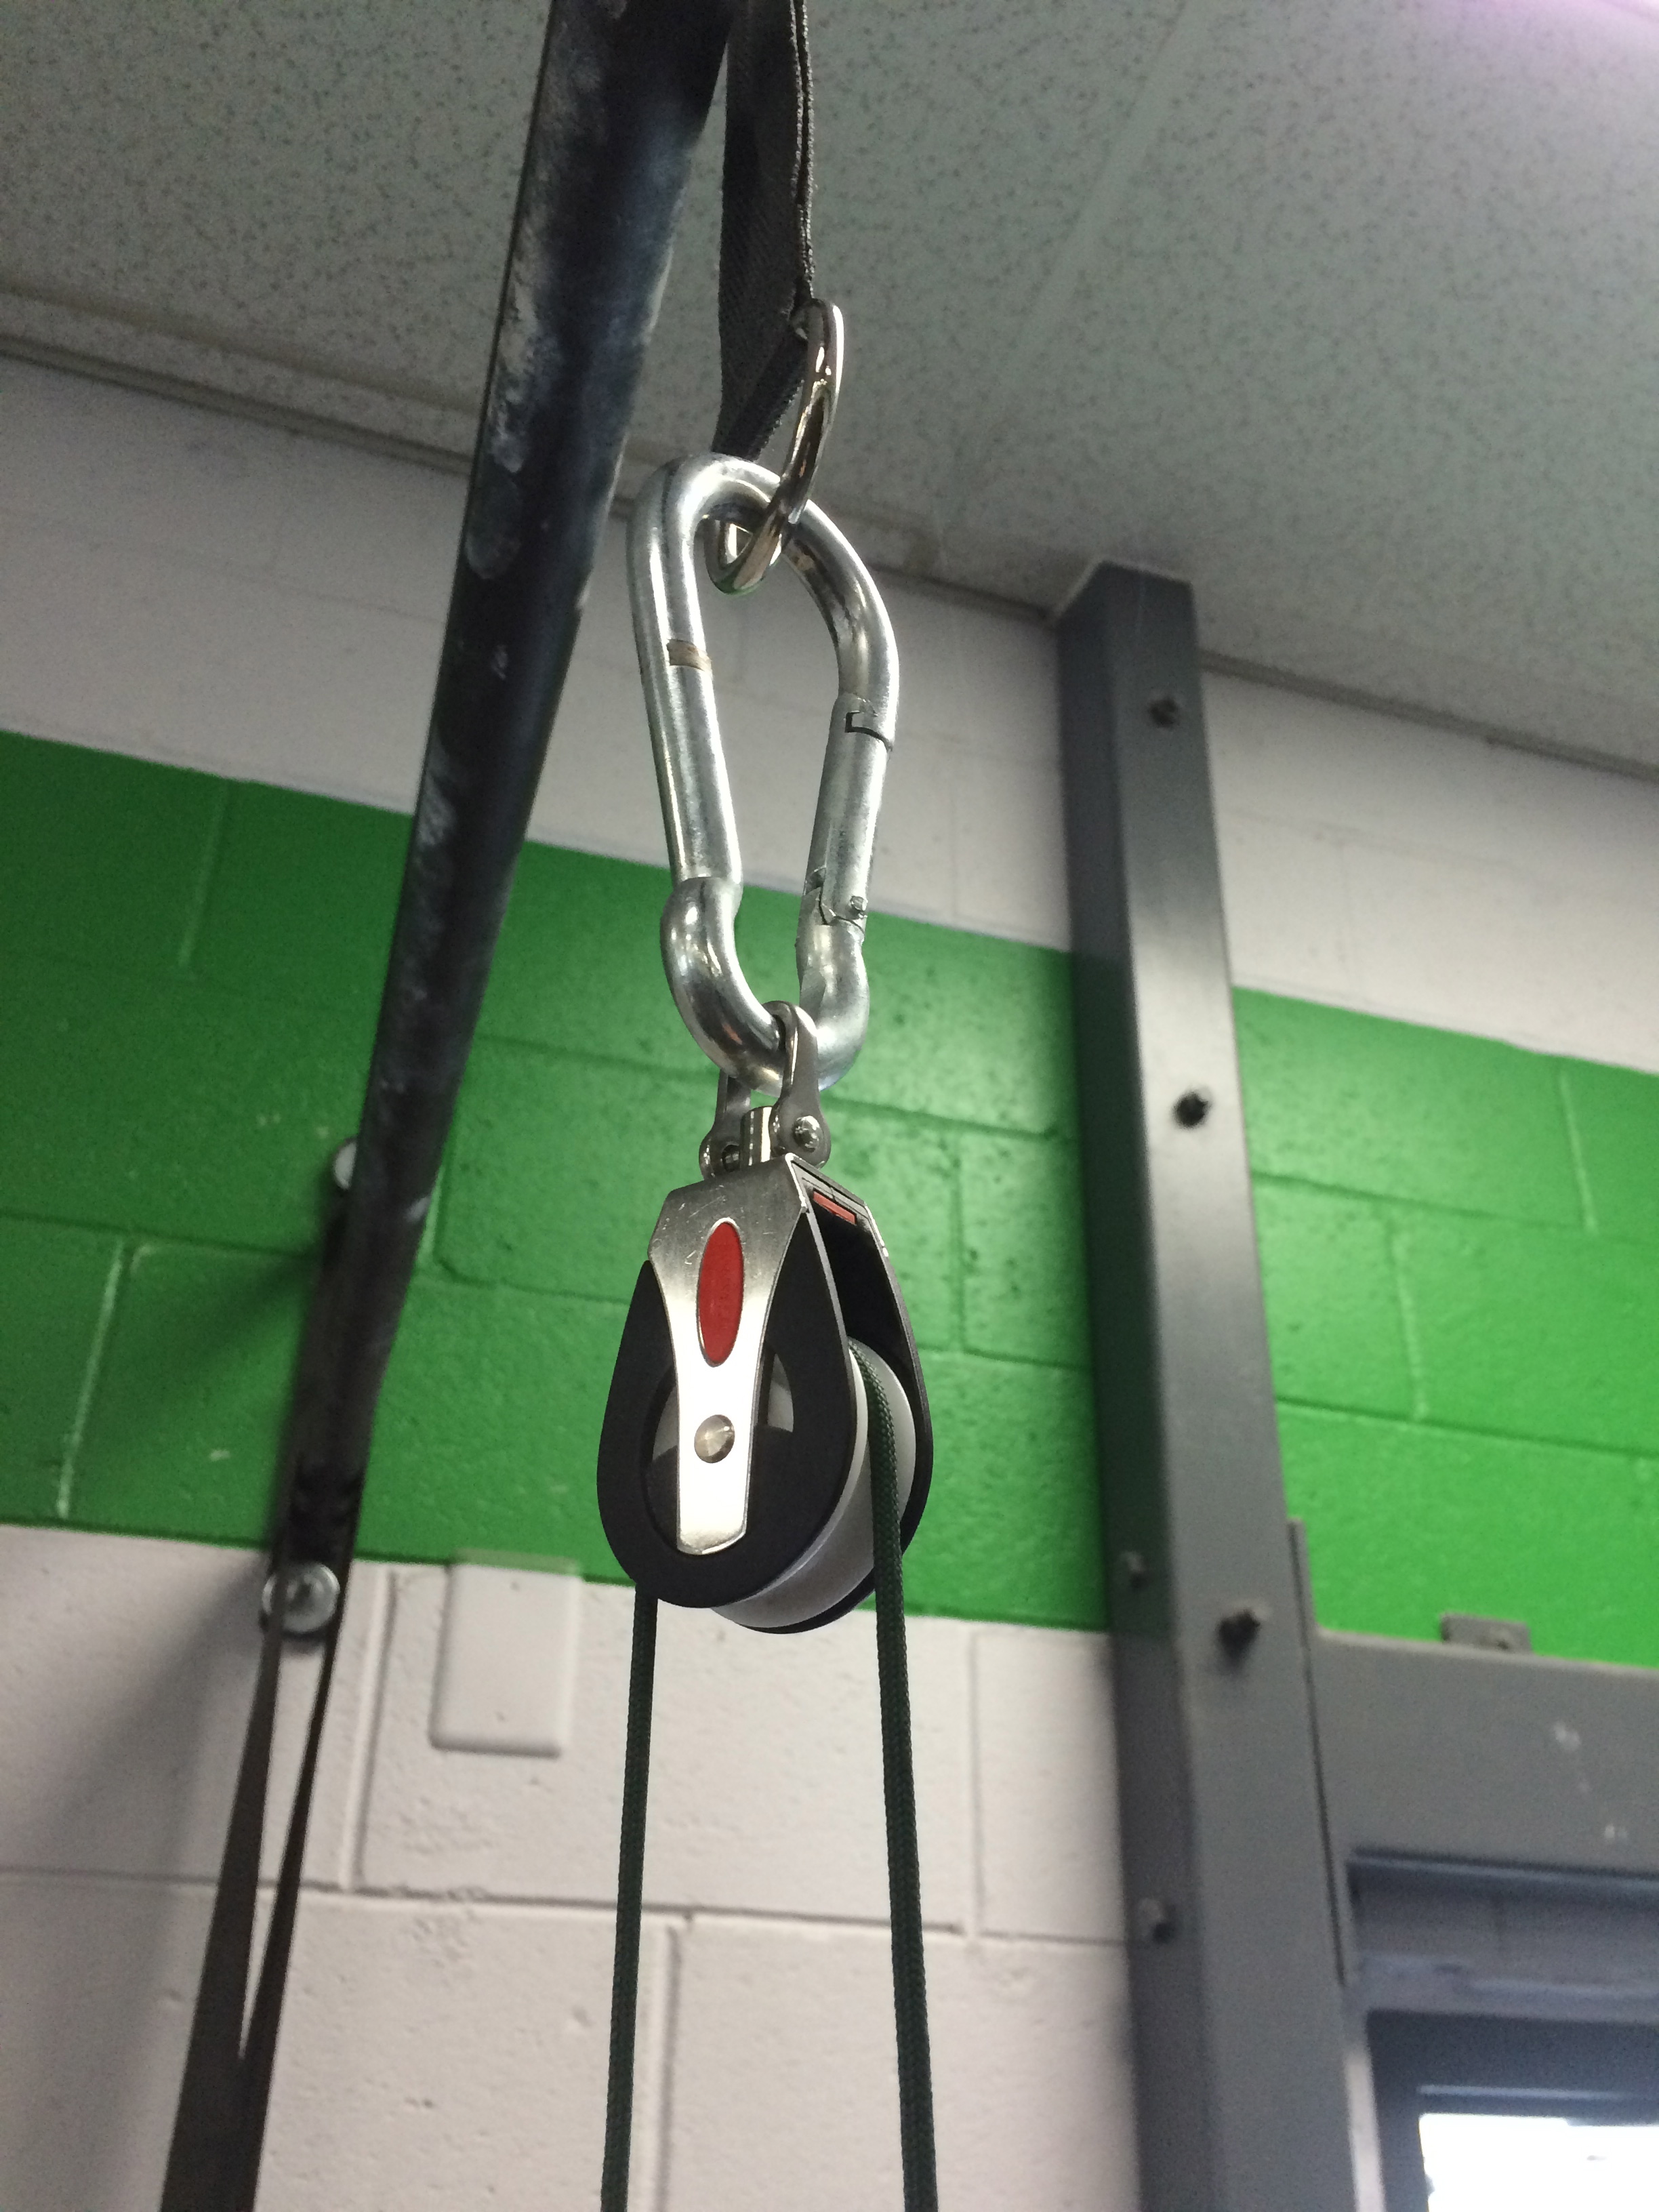 15 Minute Diy workout pulley system for Build Muscle